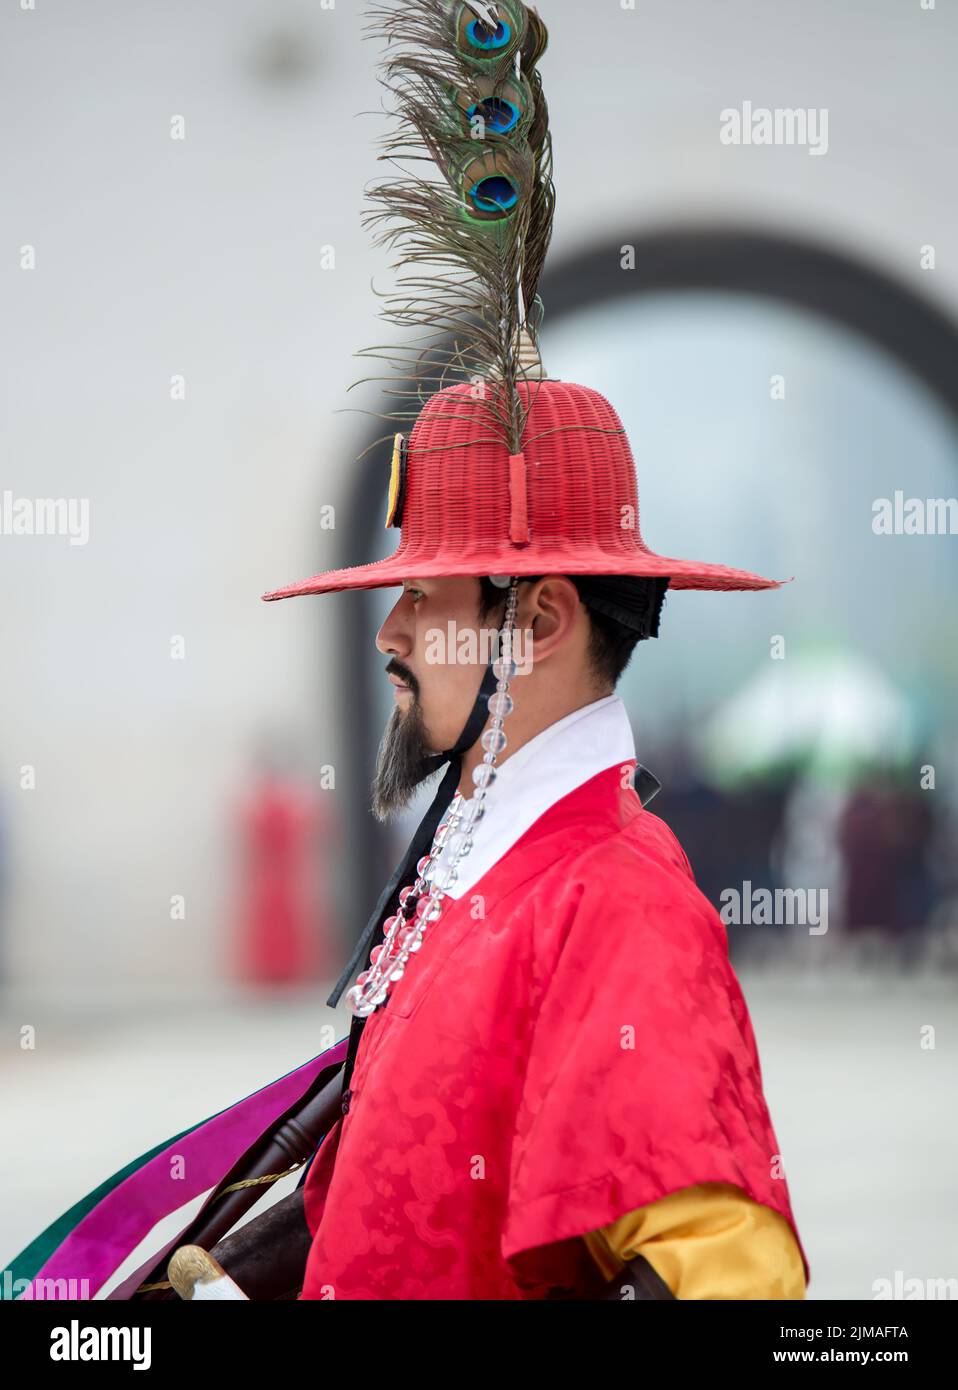 Dressed in traditional costumes from Gwanghwamun gate of Gyeongbokgung Palace Guards Stock Photo